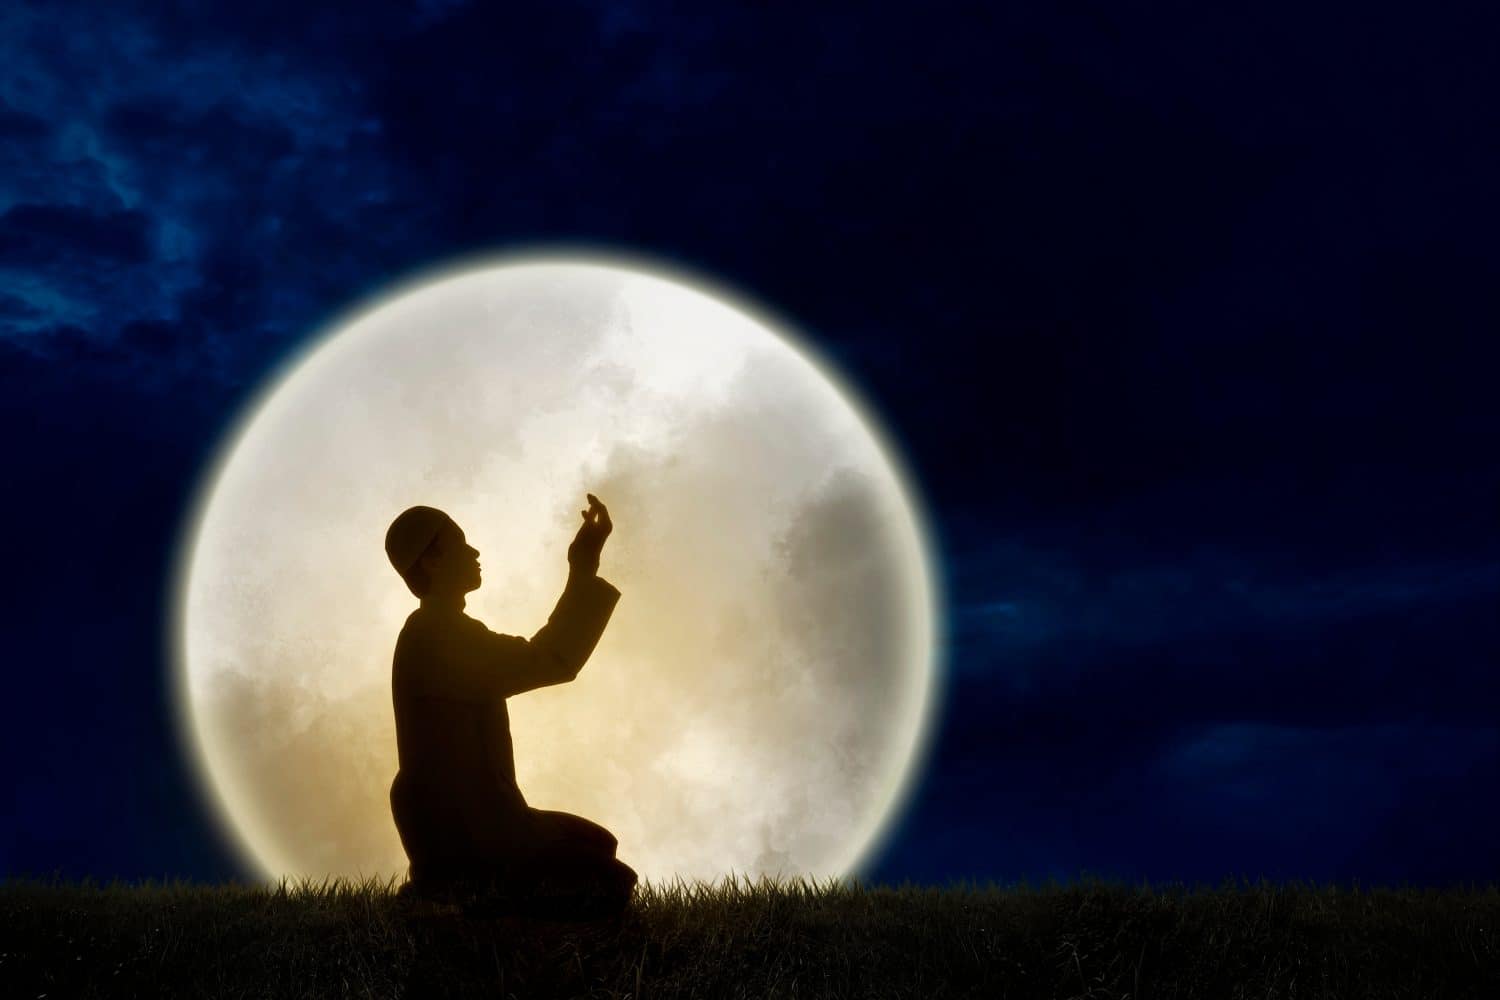 Double exposure image of silhouette muslim man praying with a huge full moonlight background